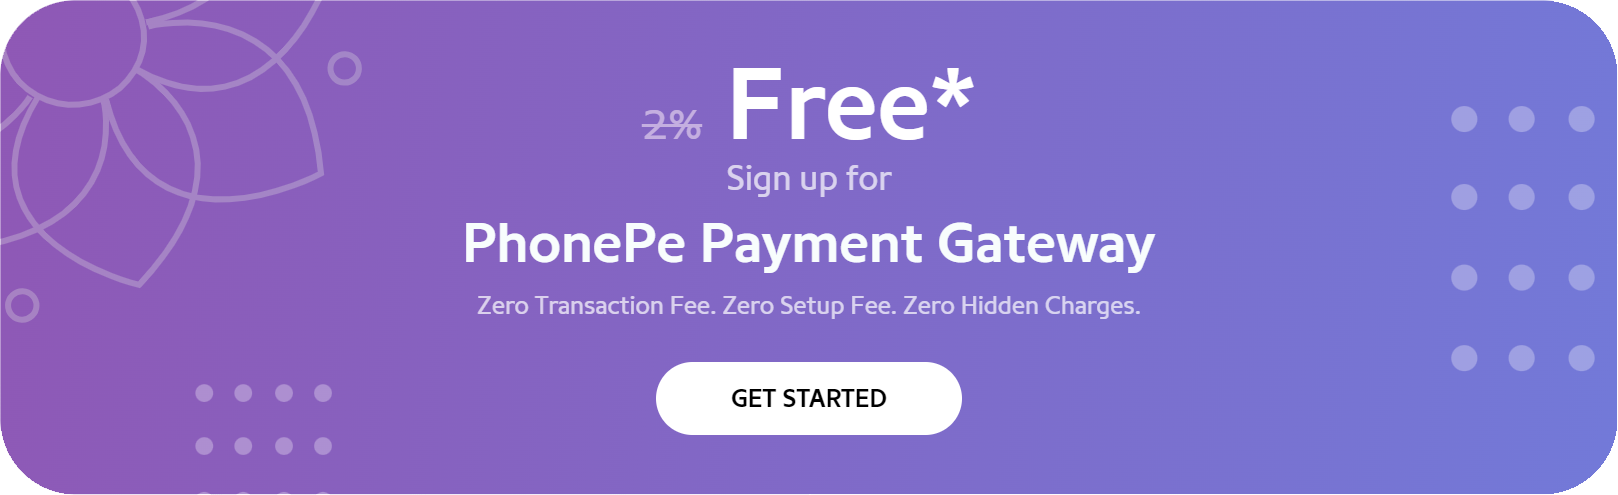 Phonepe PG Accept Payment for Free